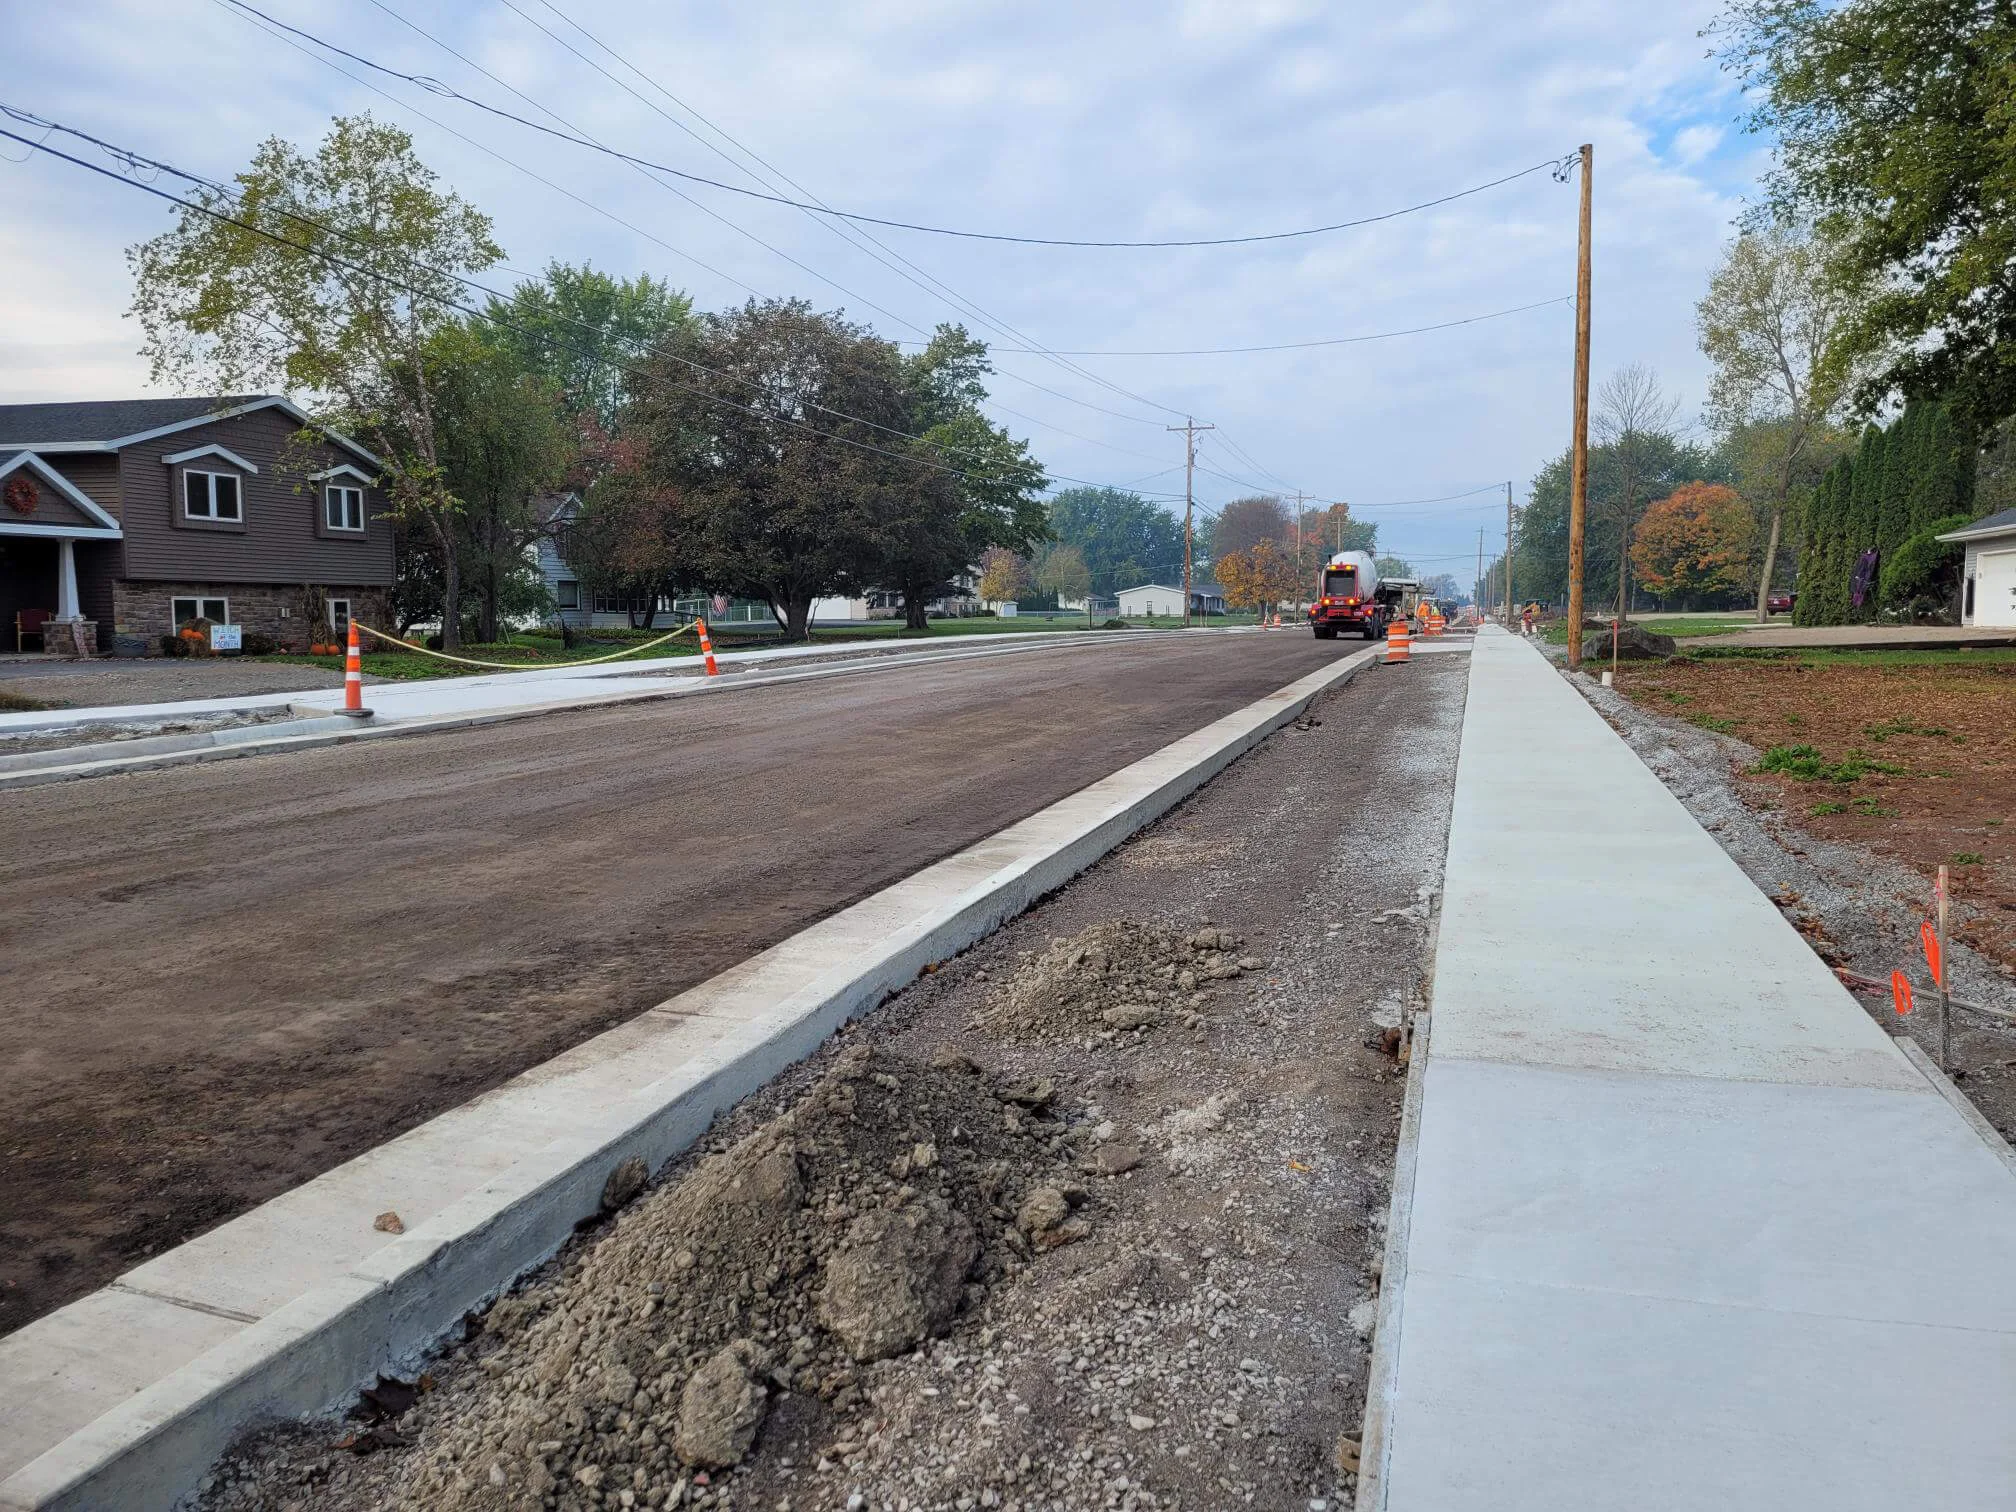 Road and sidewalk construction is underway in a residential neighborhood in the Town of Algoma